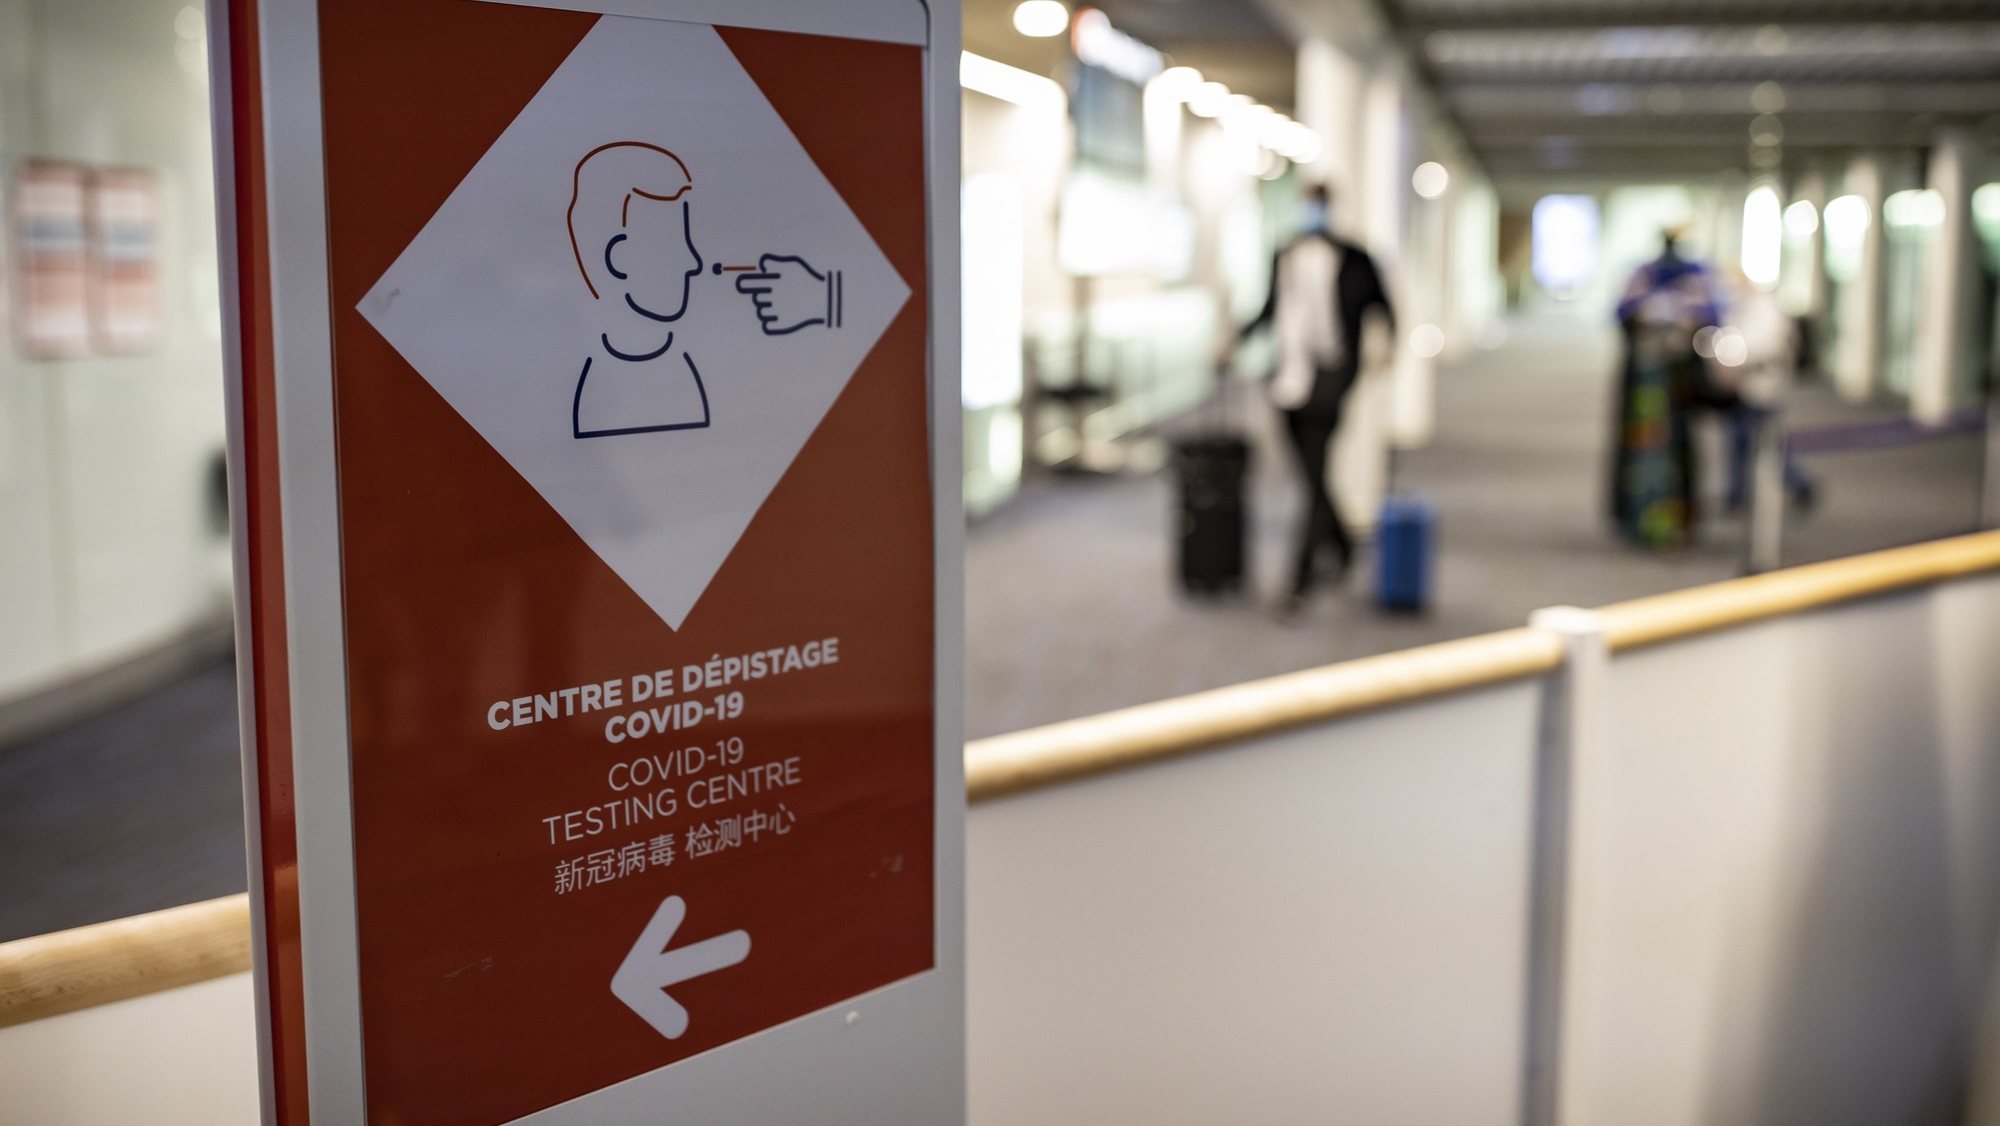 epa09158051 A sign indicates the way to a sanitary control point for passengers arriving from countries listed as red zones, at the passport control area of Roissy Charles de Gaulle airport in Roissy near Paris, France, 25 April 2021. Passengers arriving in France from Brazil, Chile, Argentina, South Africa, India and Guyana must submit to a Covid19 antigenic test and follow a 10 day quarantine at home, to curb the spread of Covid19 coronavirus variants.  EPA/IAN LANGSDON /POOL